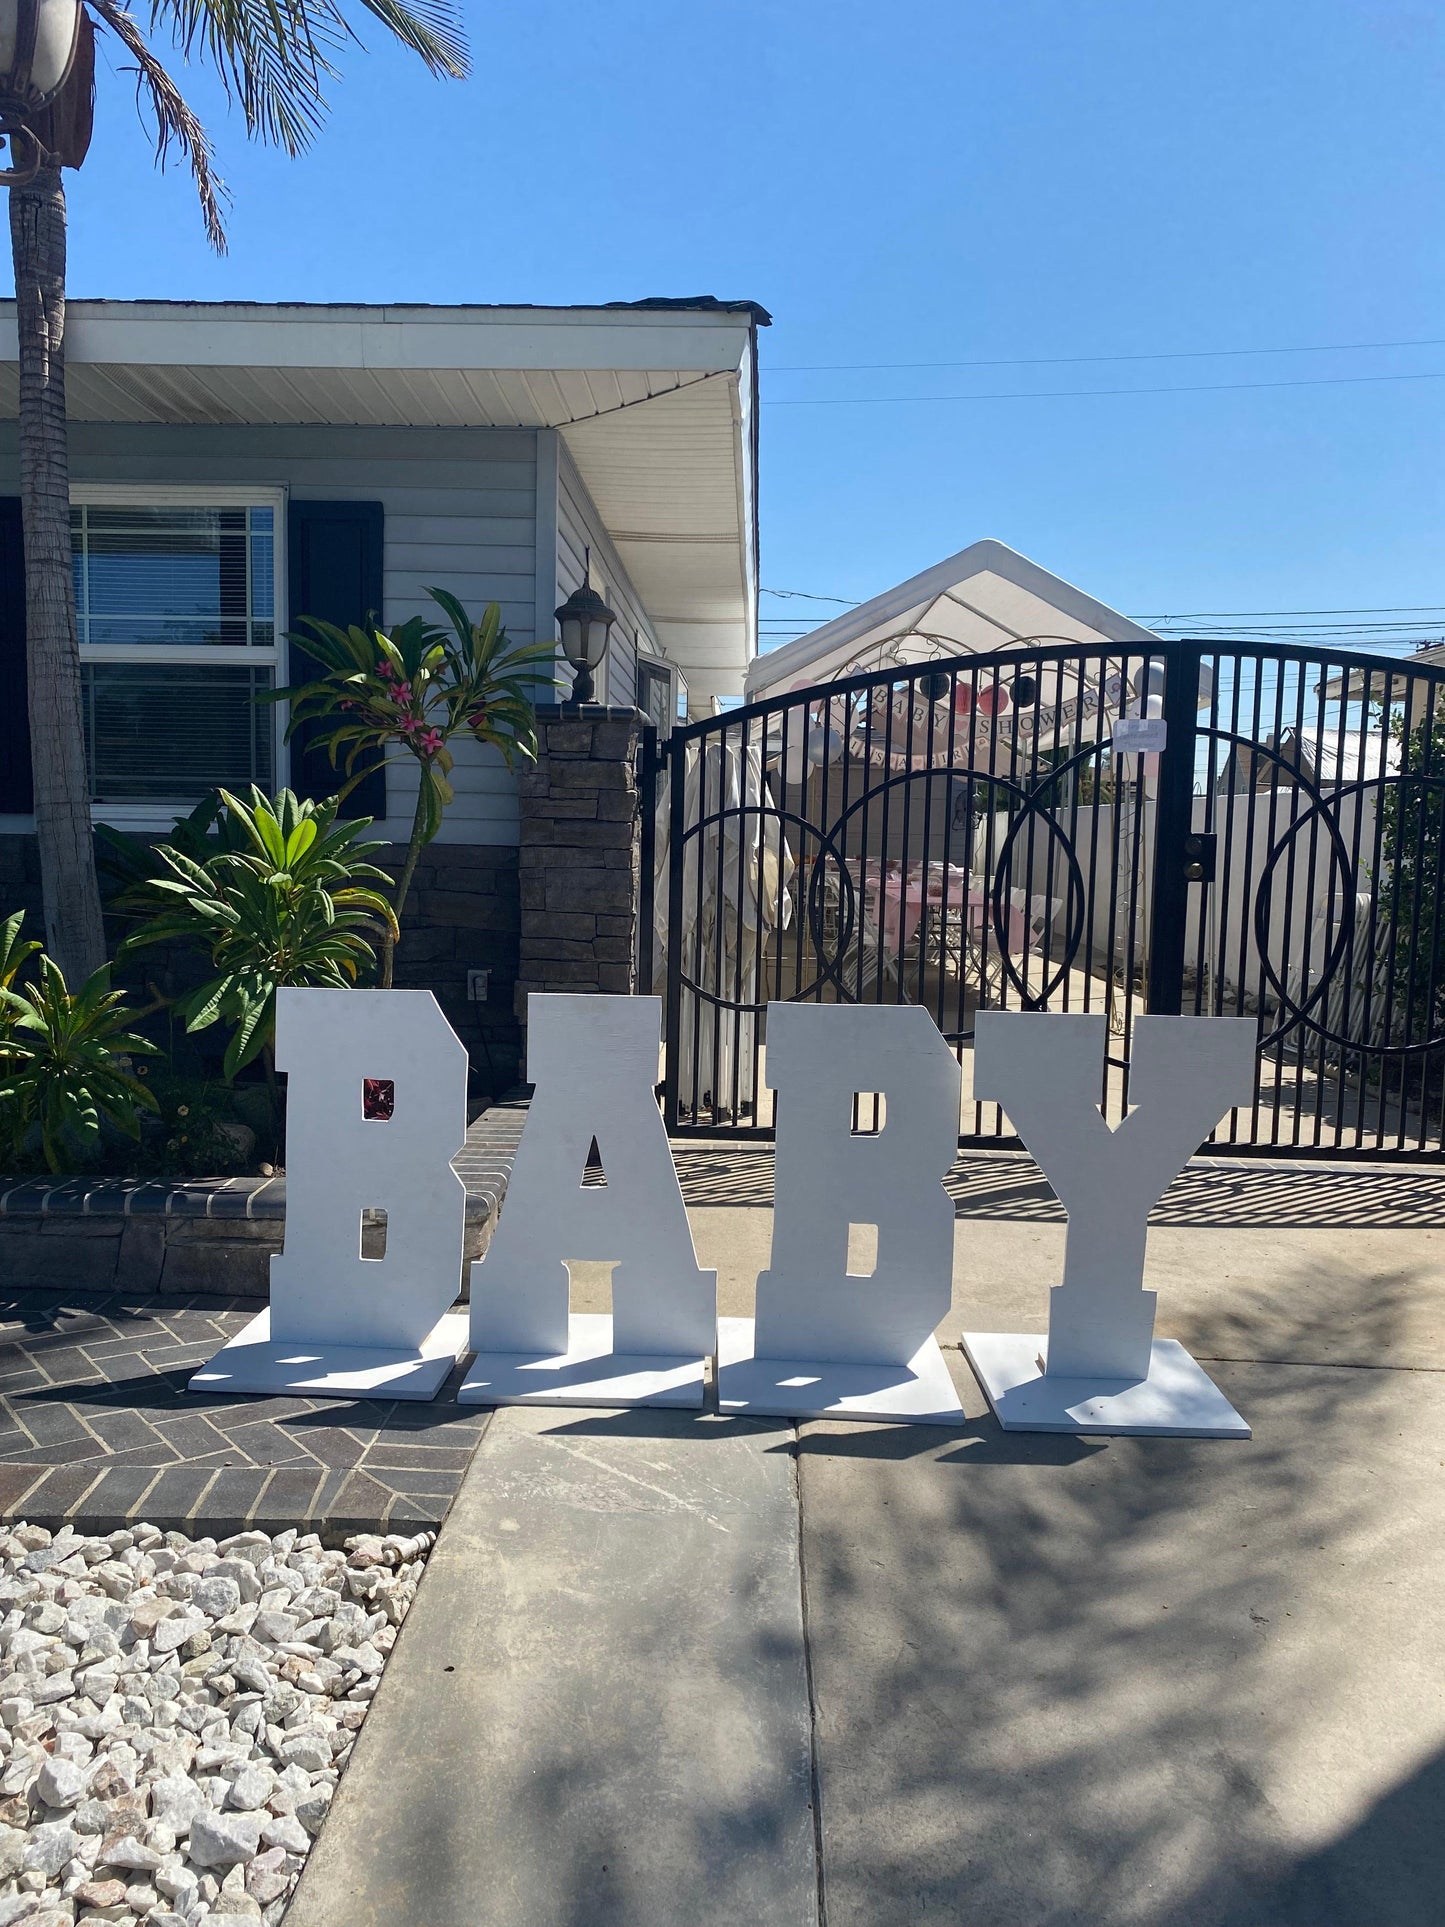 Giant BABY Letters Over Size Statue - LM Treasures Prop Rentals 